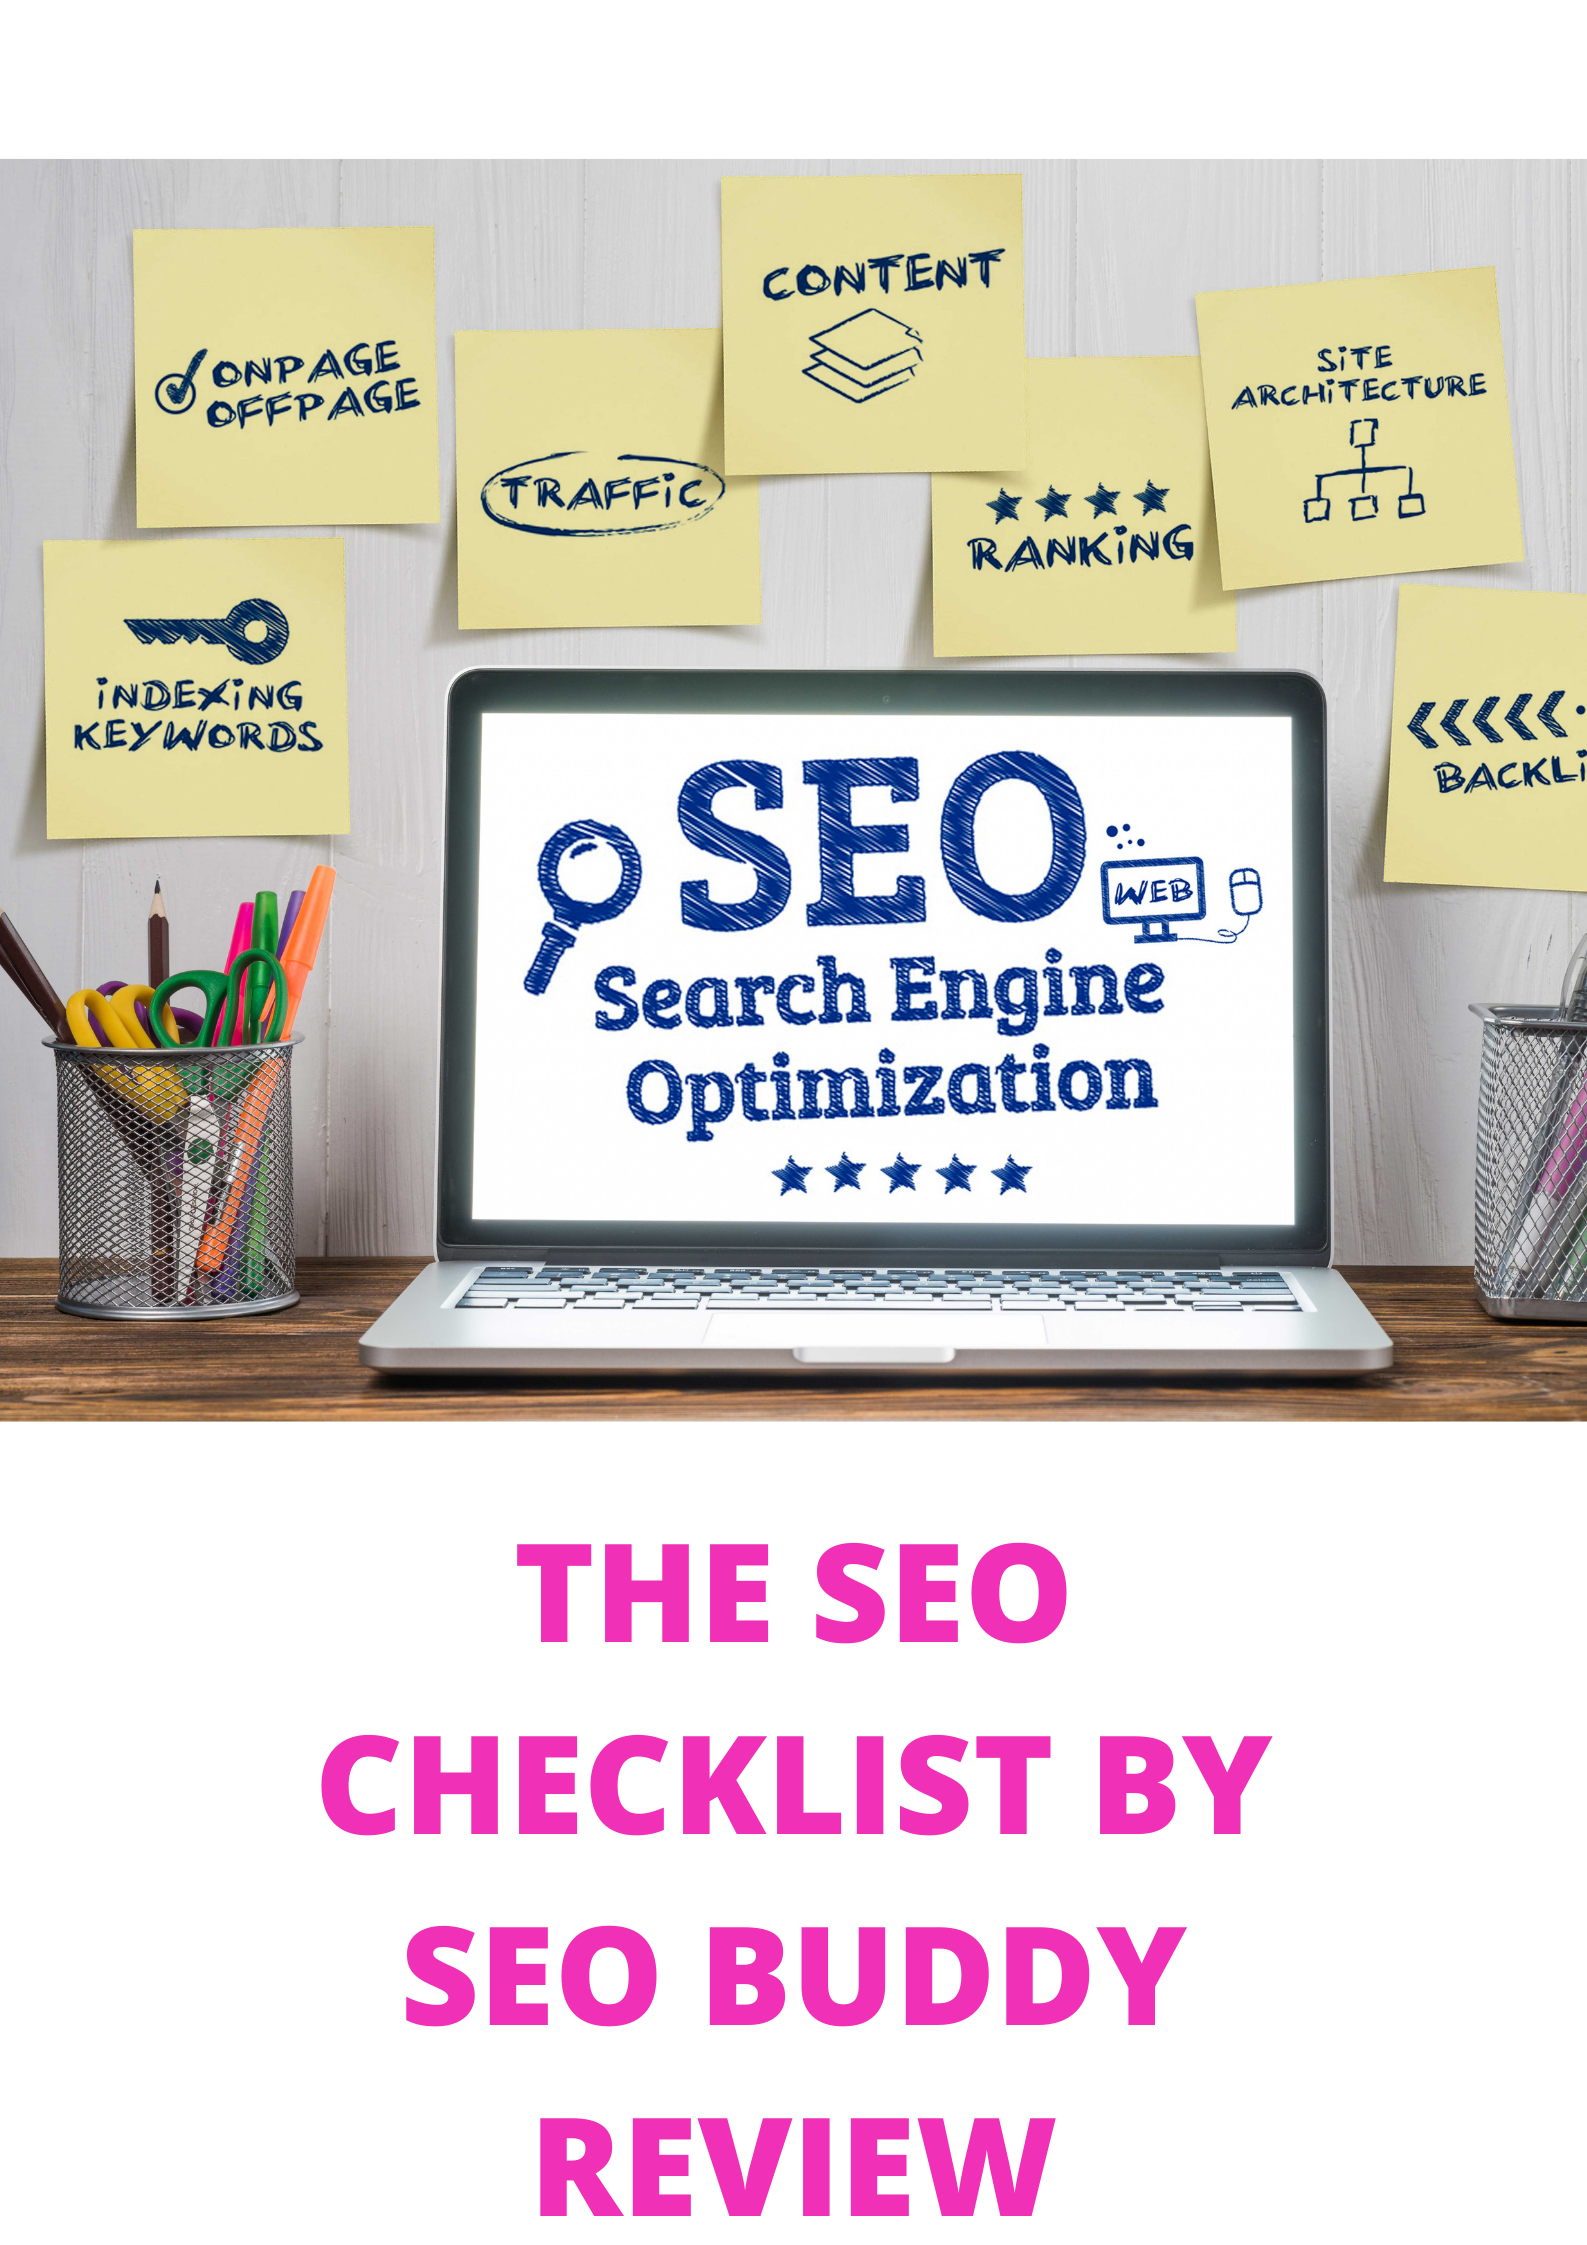 The SEO Checklist by SEO Buddy Review